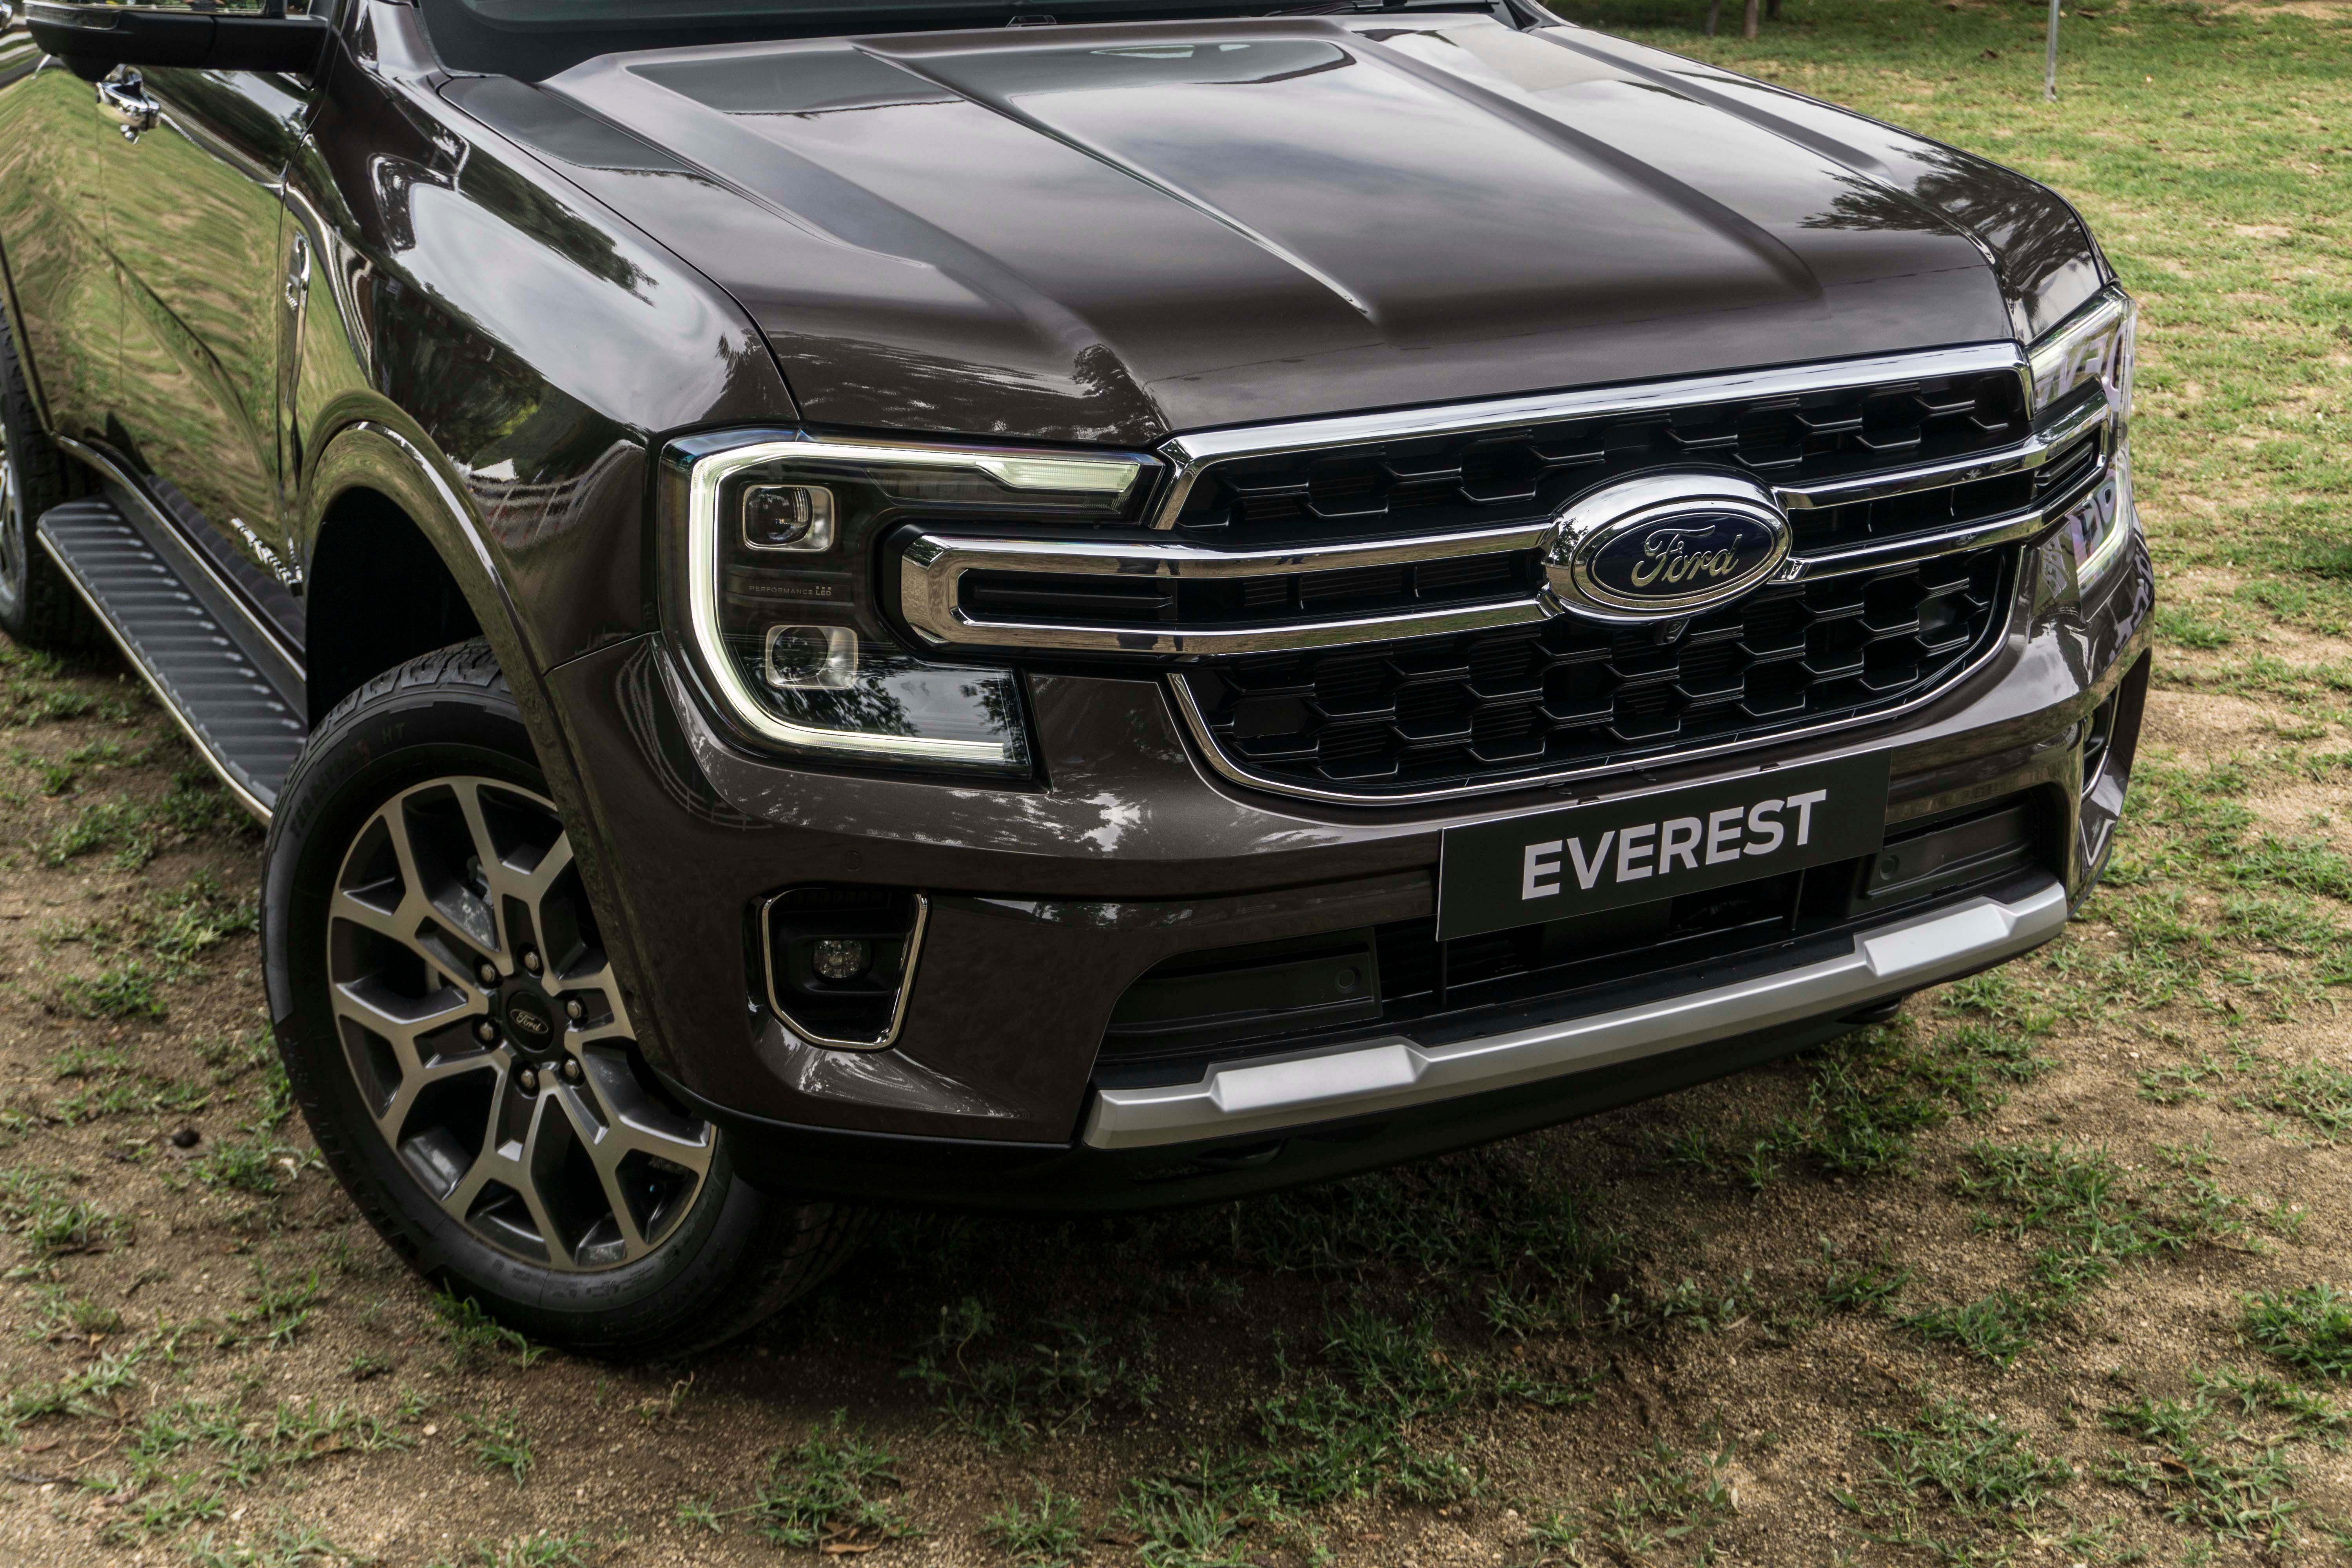 2022 2023 Ford Everest First Drive: What the Ford Explorer Used to Be